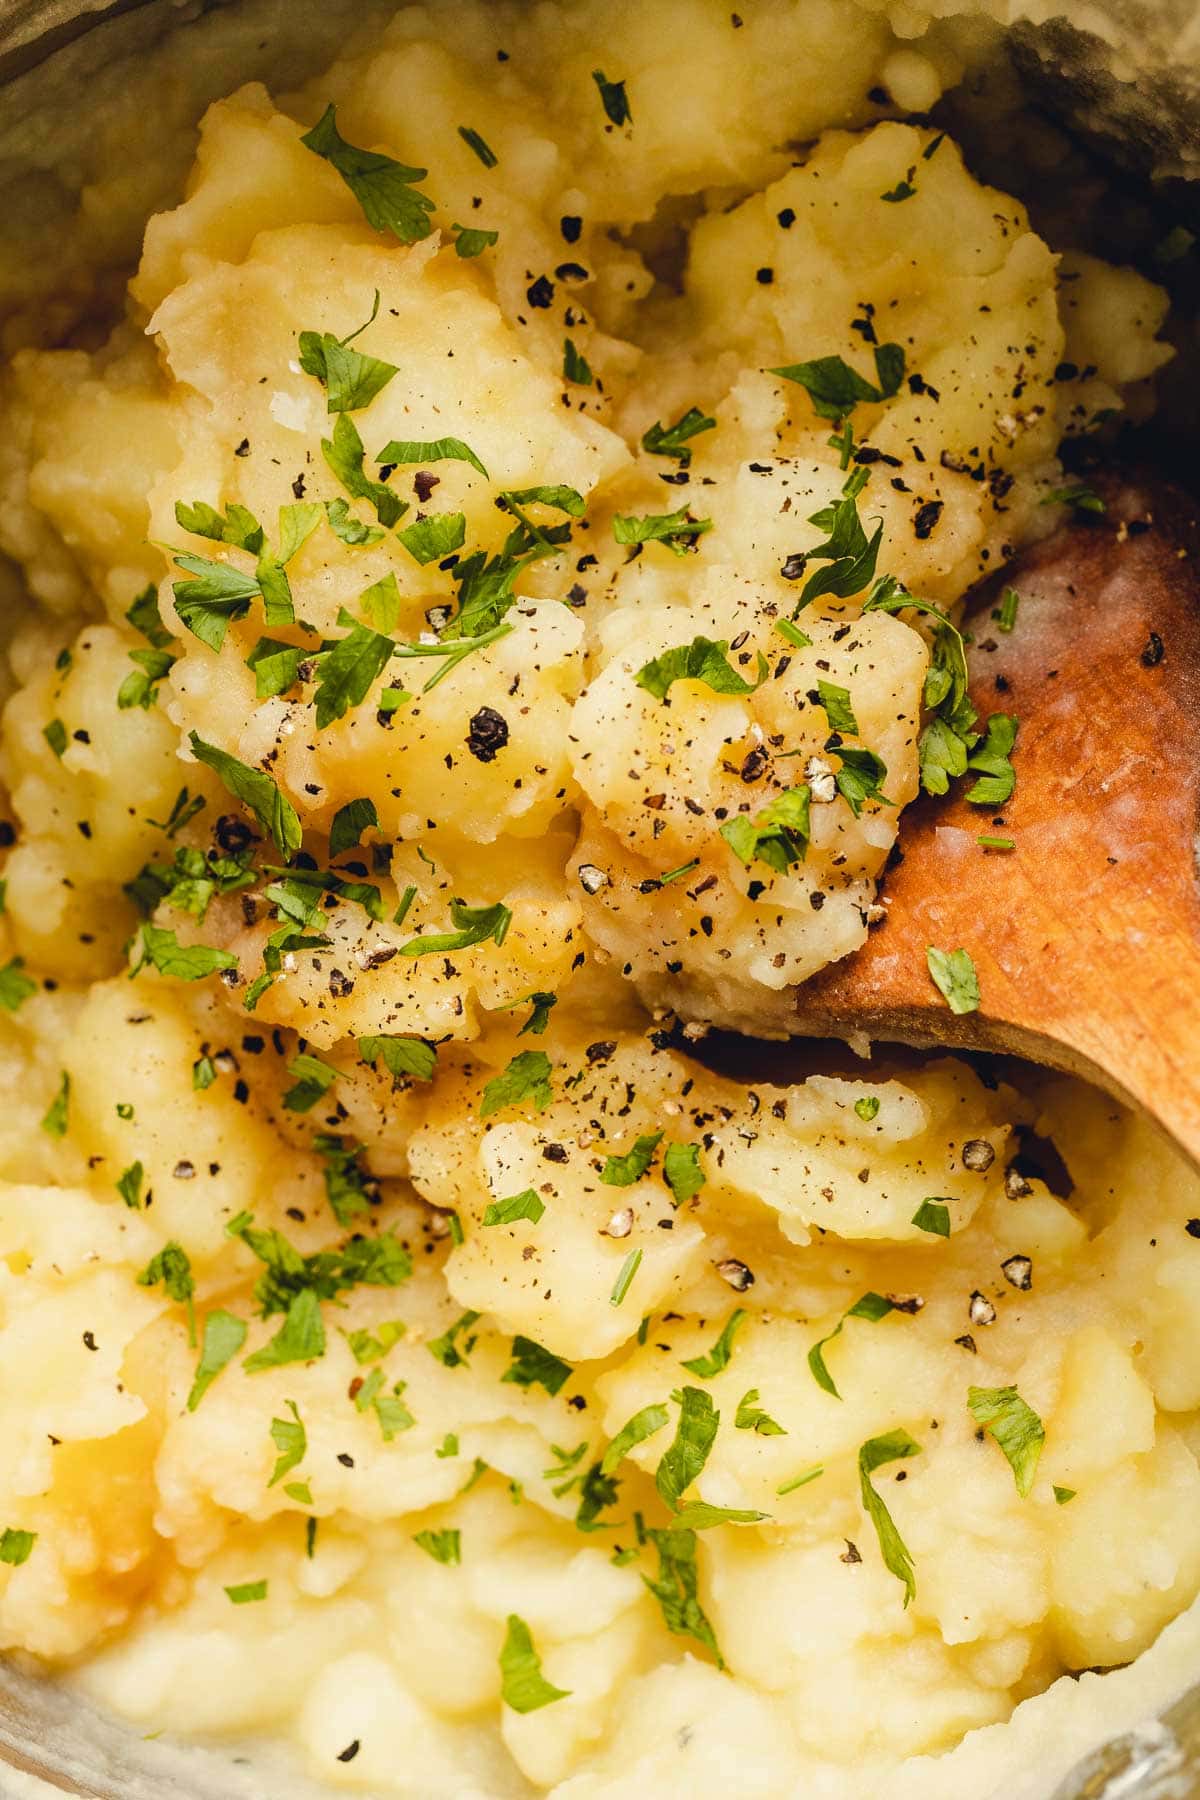 A close-up image of stewed potatoes.